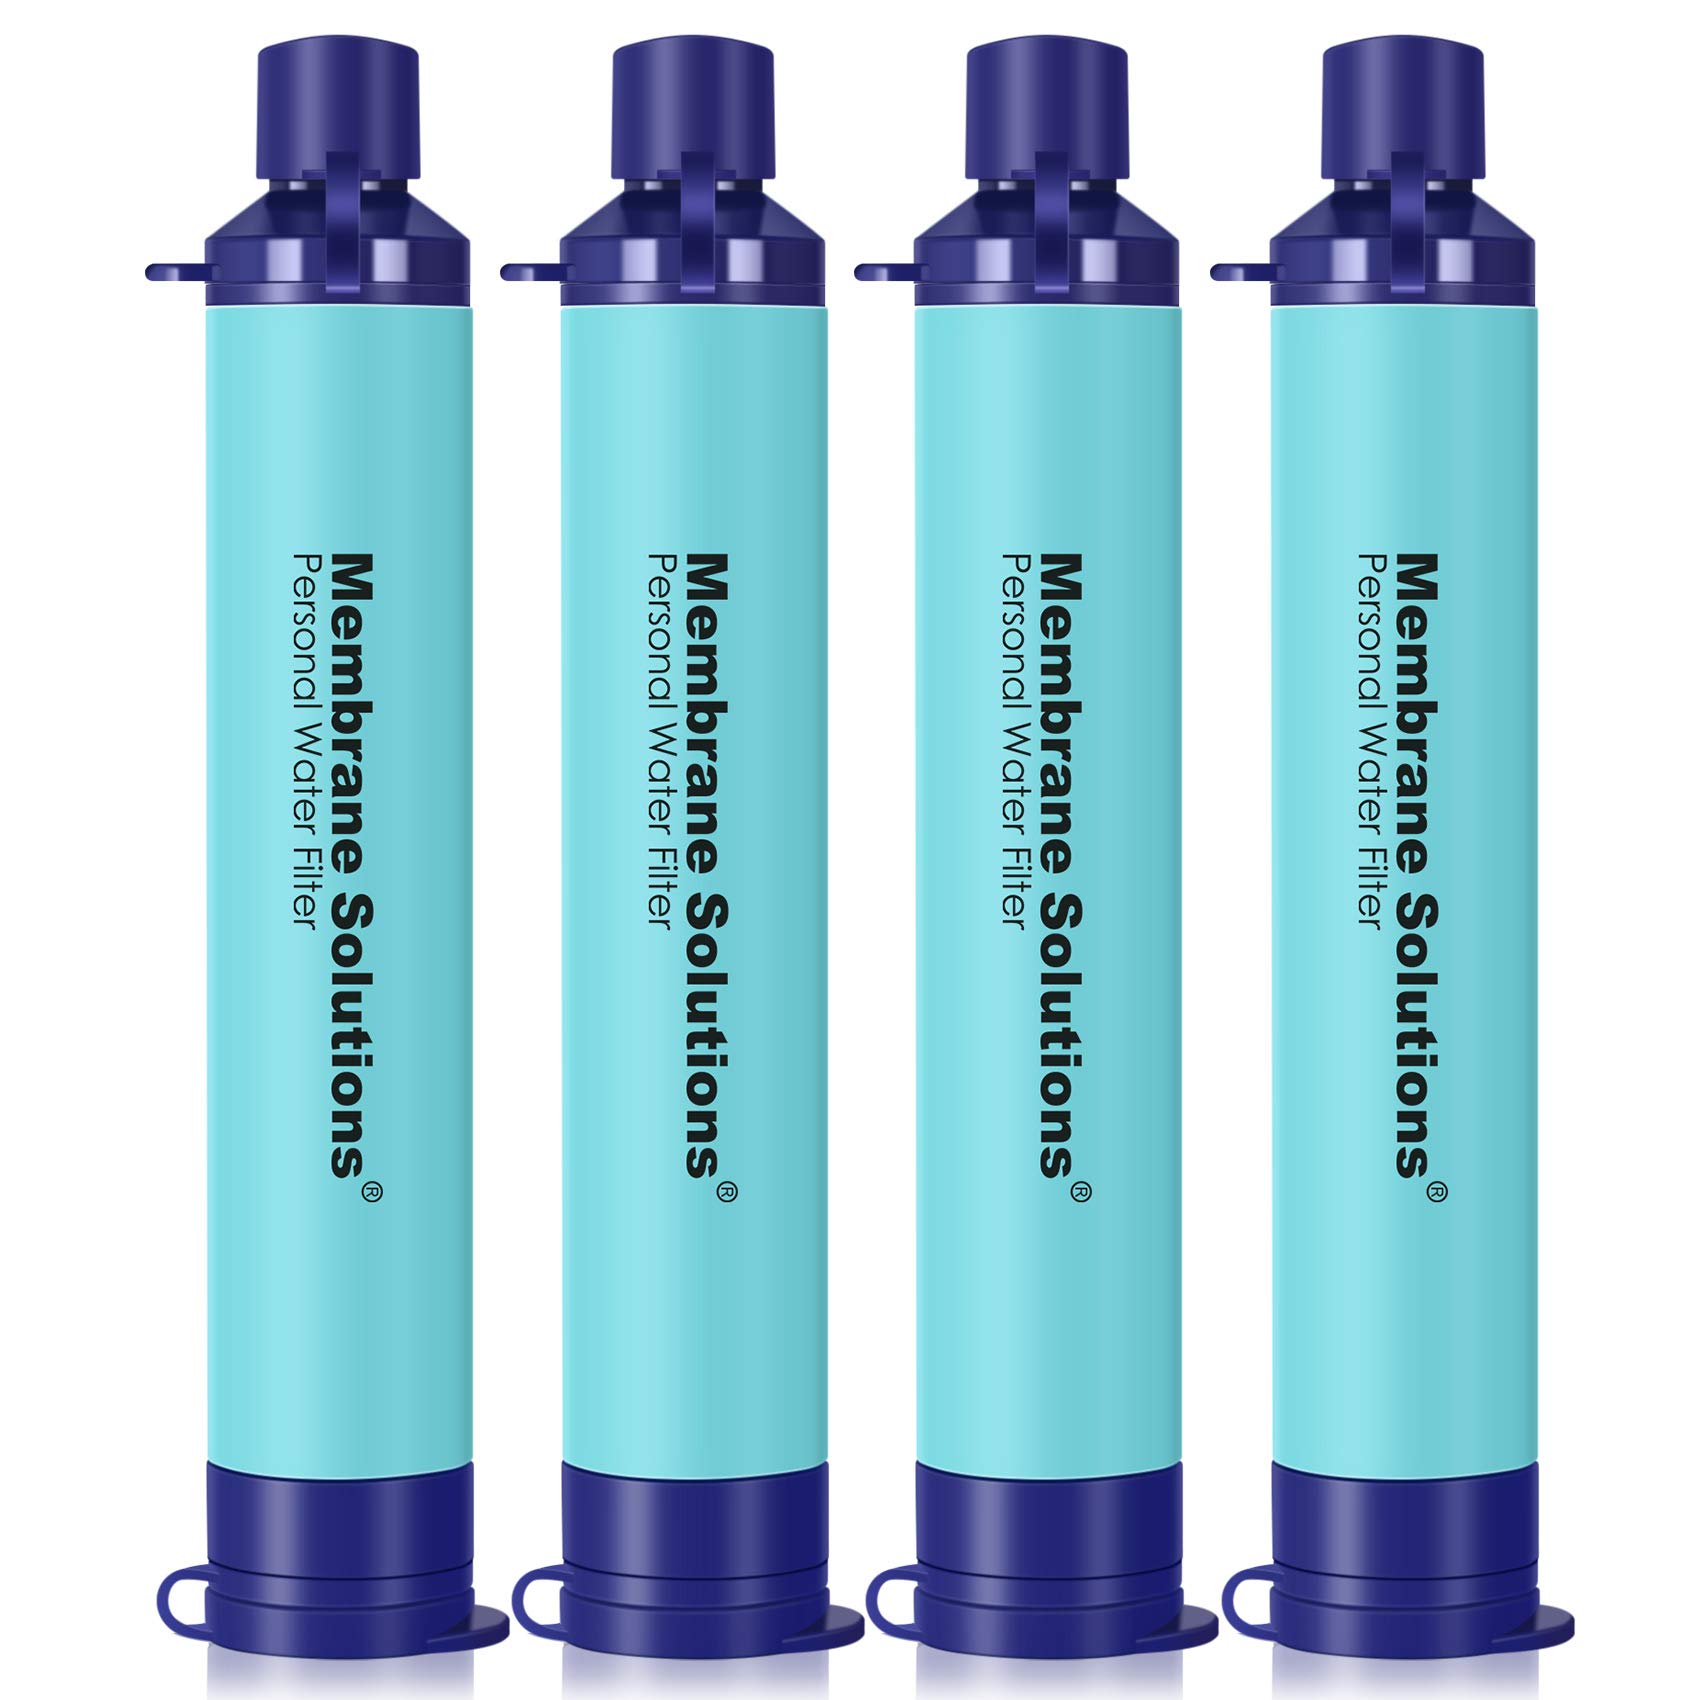 Membrane Solutions Portable Water Filter Straw Filtration Straw Purifier Survival Gear for Hiking, Camping, Travel, and Emergency, Blue, 4 pack - $25.09